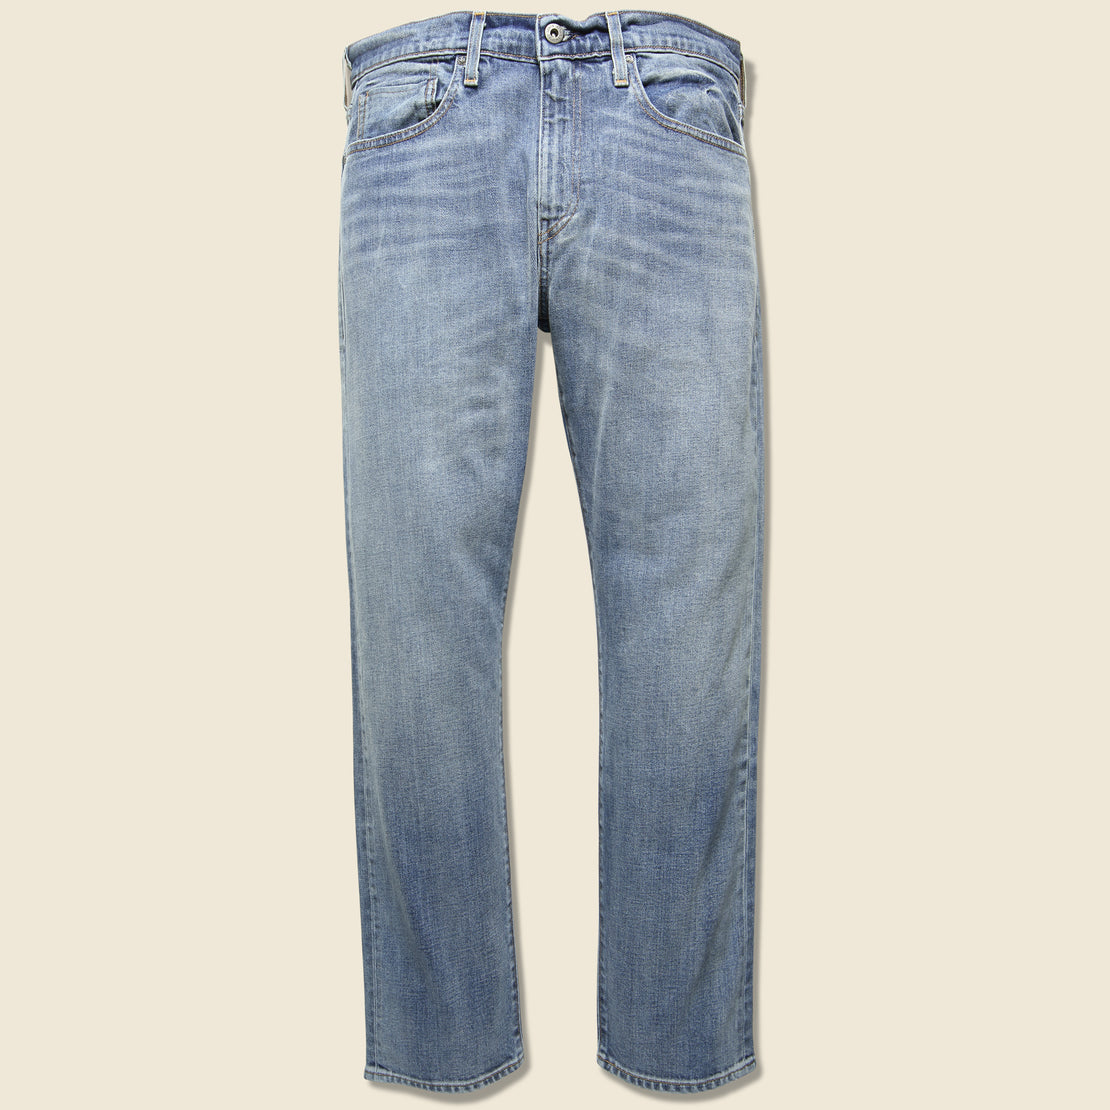 Levis Made & Crafted 502 Tapered Jean - Murphy 1